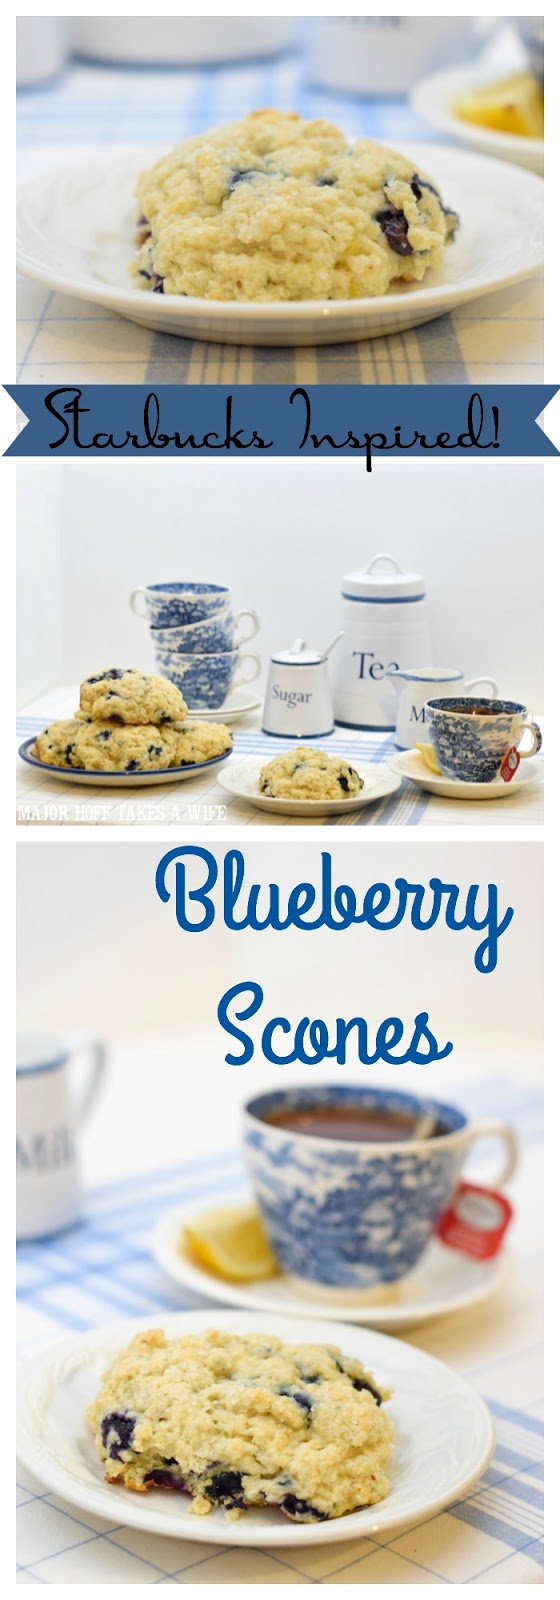 A melt in your mouth recipe for blueberry scones. Inspired by Starbucks in house version, this blueberry scone with hints of lemon and a crunchy sugary top will delight everyone. Serve during High Tea, or just as a mid afternoon snack. Perfect along side tea or coffee, or as a stand alone blueberry dessert. You won't believe how easy these are to make! Never made scones before? Never fear, this includes a step by step tutorial on how to make scones. #HighTea #blueberries #Starbucks #scones #dessert